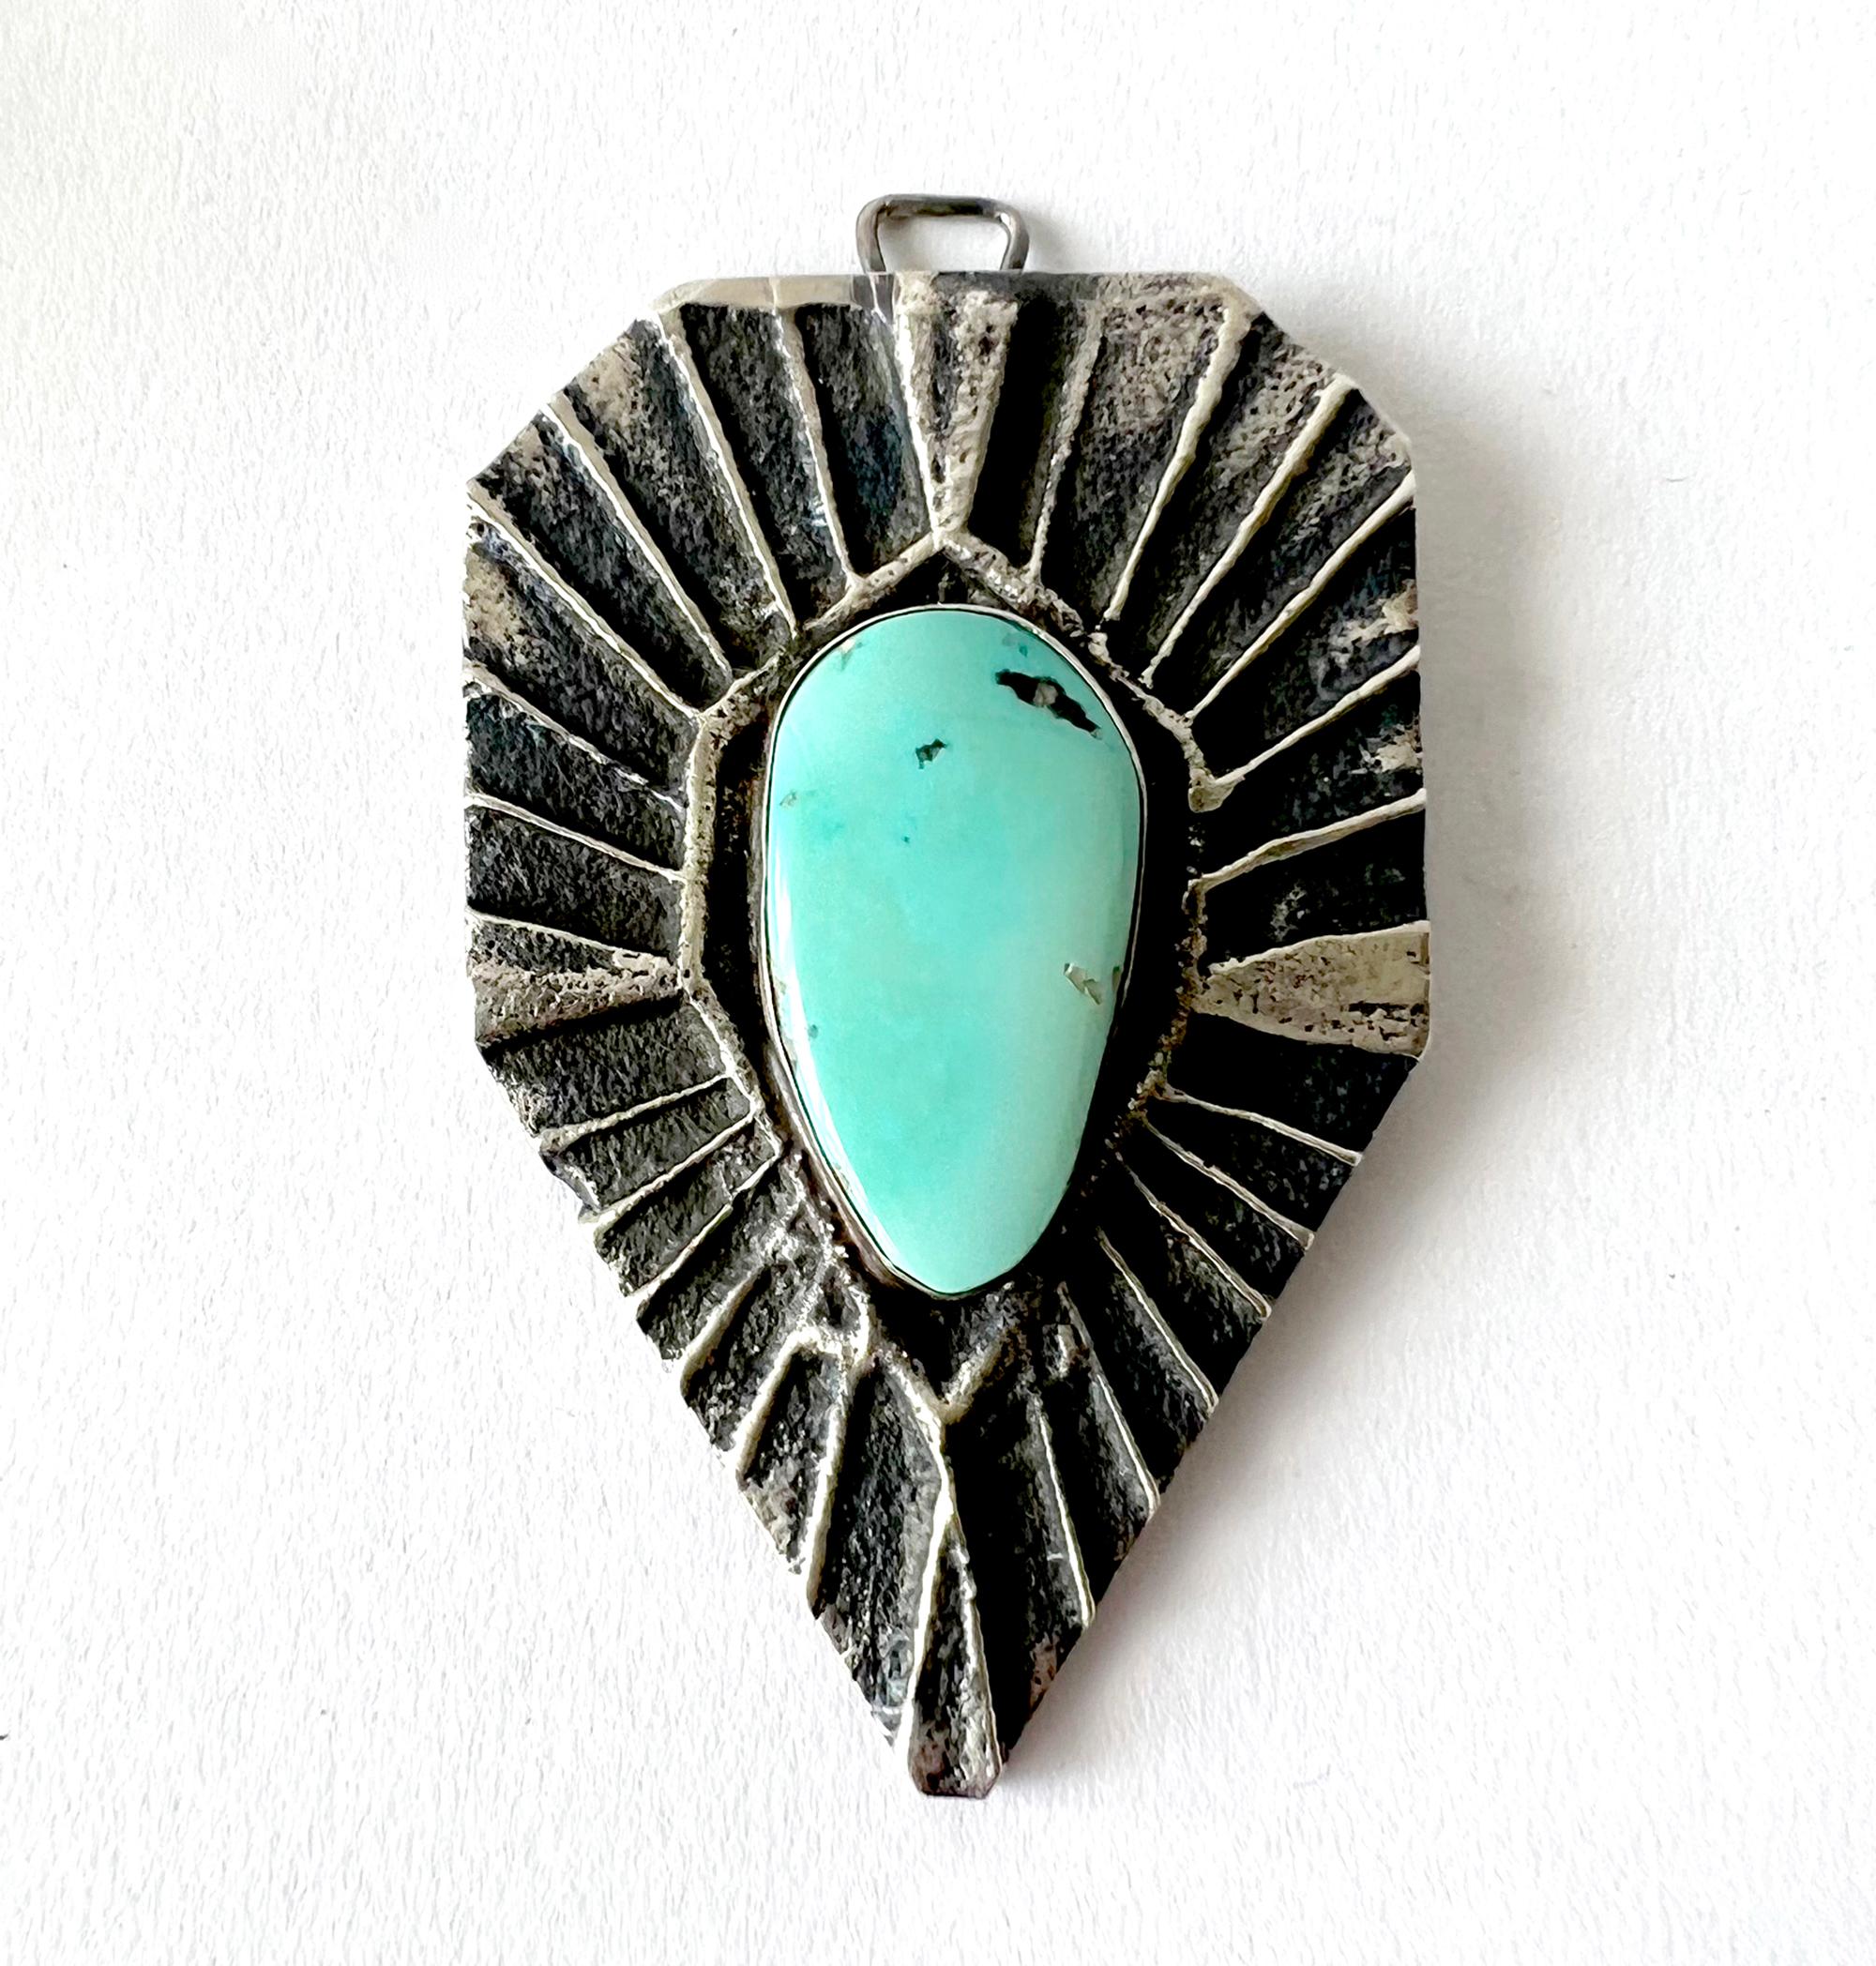 Tufa cast sterling silver and turquoise pendant created by Native American jeweler Darrin Livingston.  Pendant measures 3 3/8